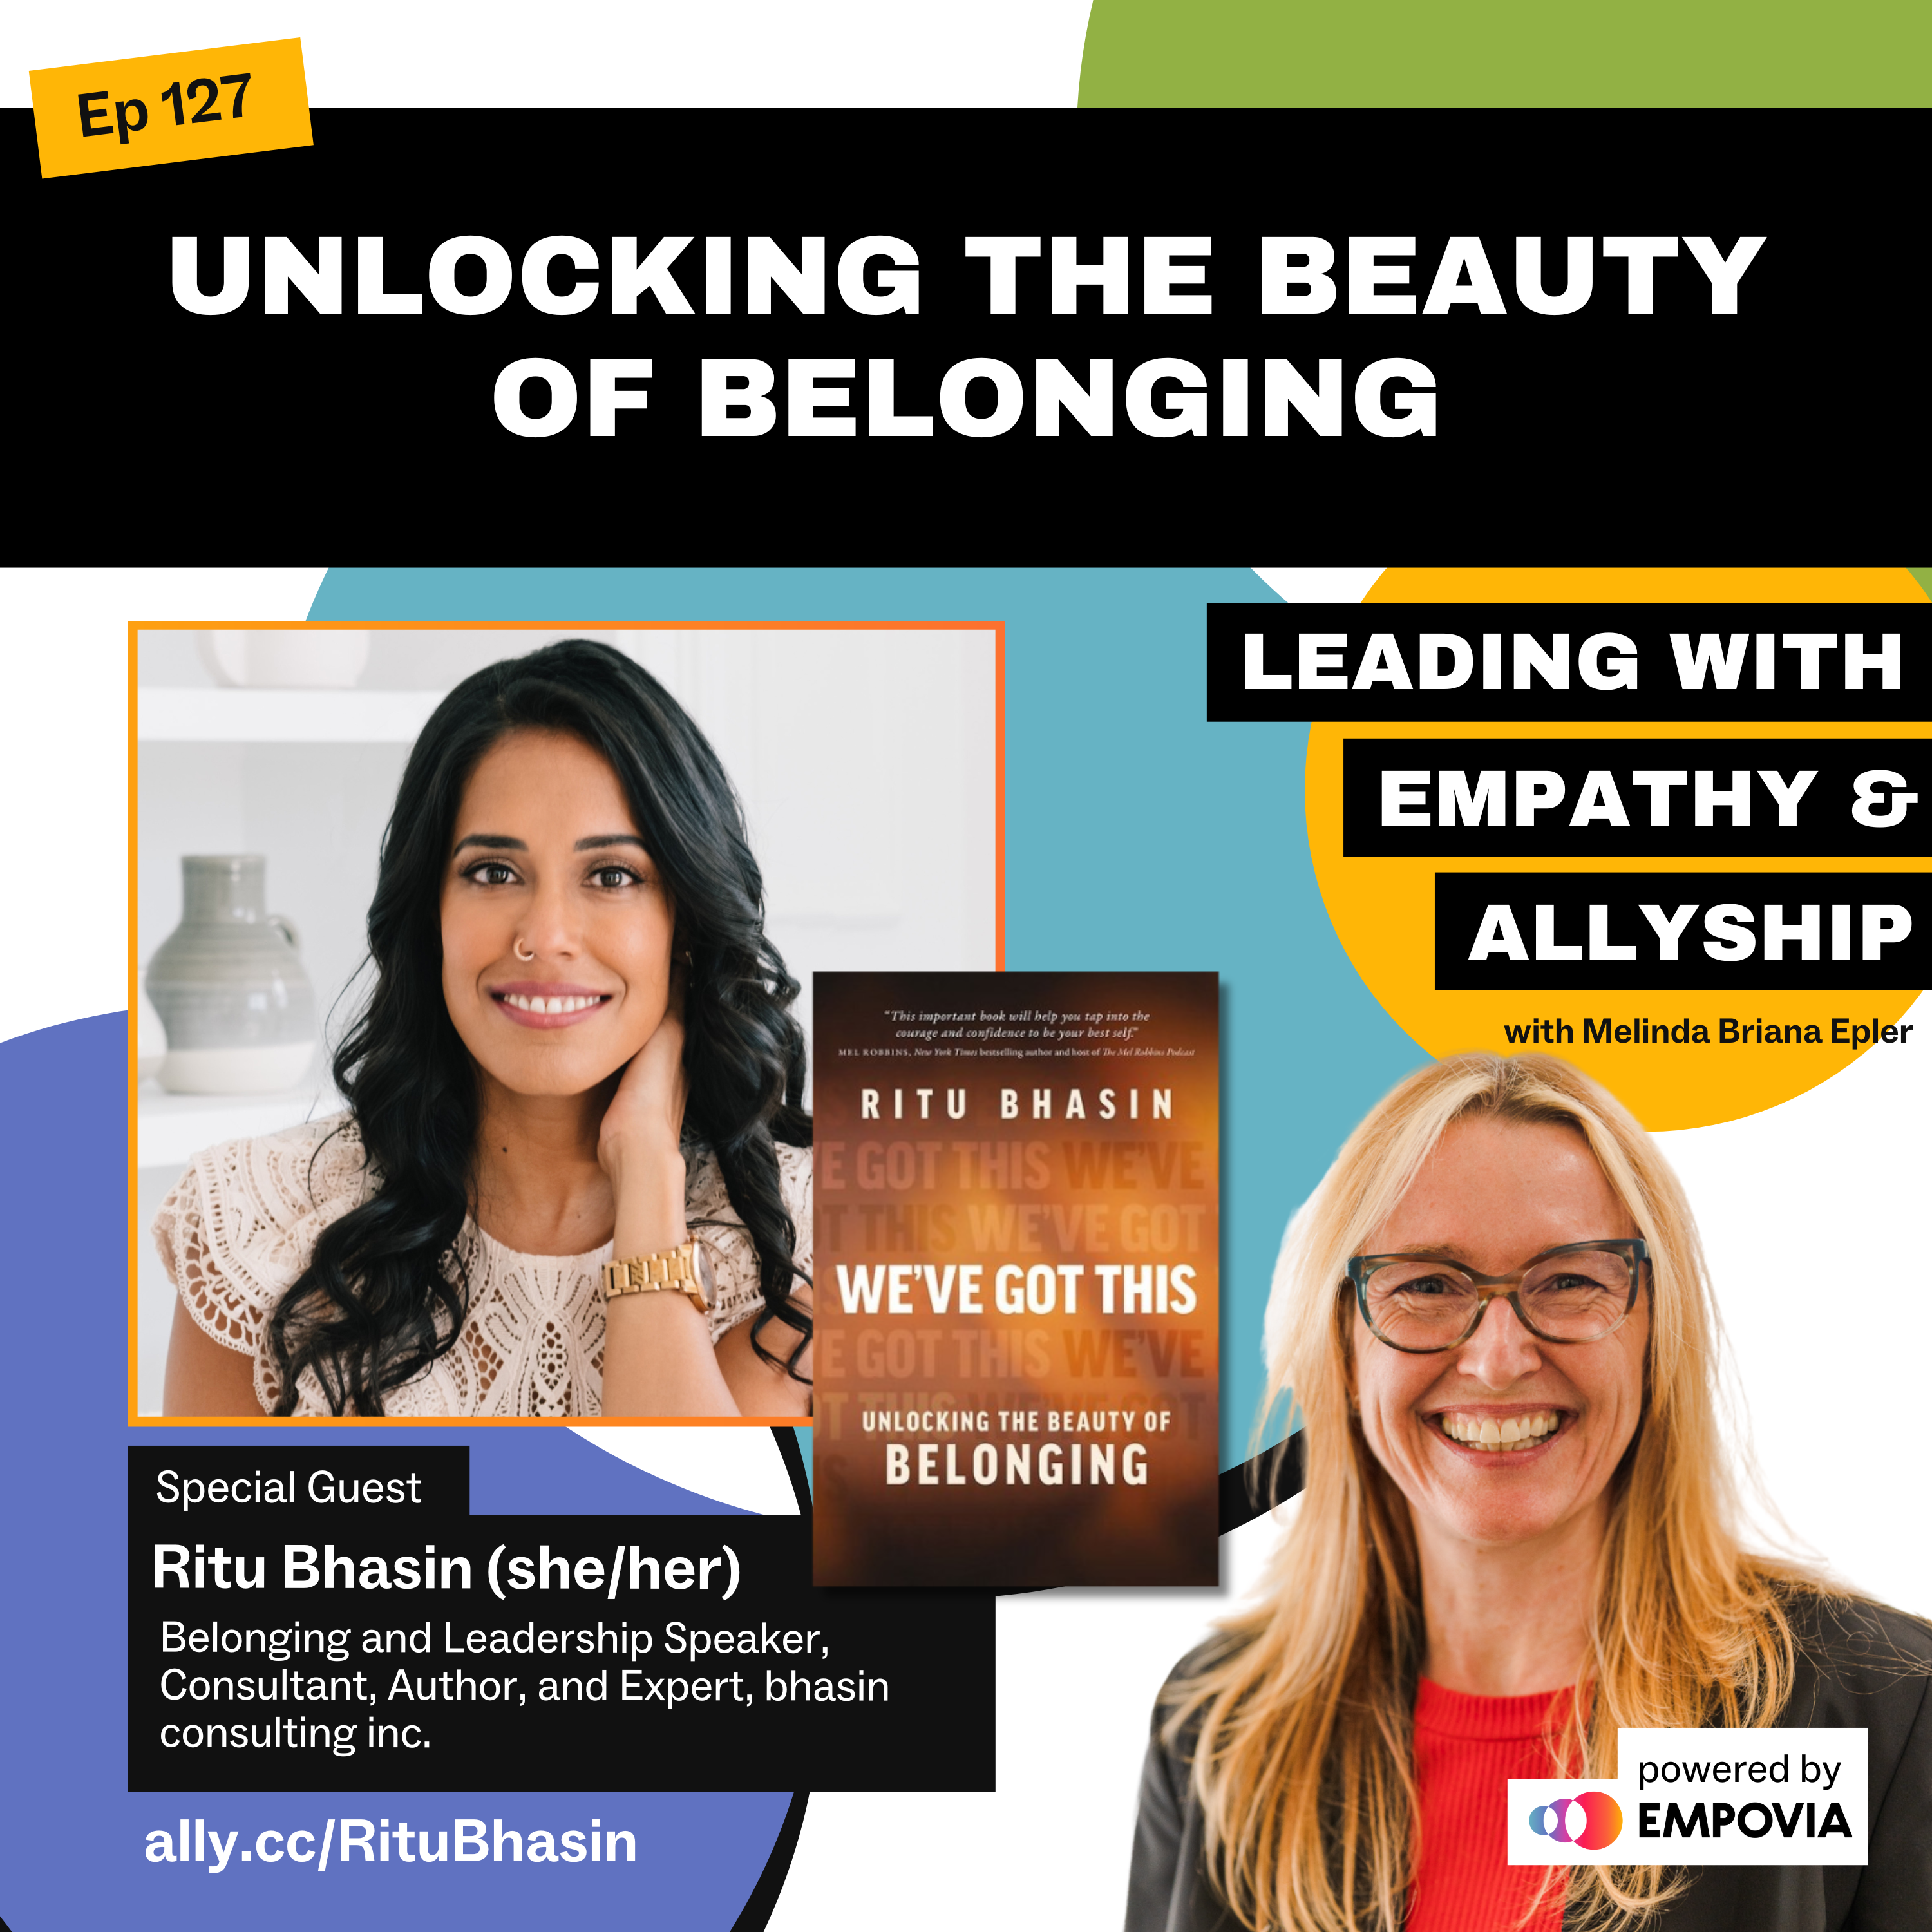 Leading With Empathy & Allyship promo and photos of Ritu Bhasin, a South Asian woman with long curled black hair, nose ring, white lace blouse, and golden wristwatch; the brown book cover of We've Got This: Unlocking the Beauty of Belonging; and host Melinda Briana Epler, a White woman with blonde and red hair, glasses, red shirt, and black jacket.